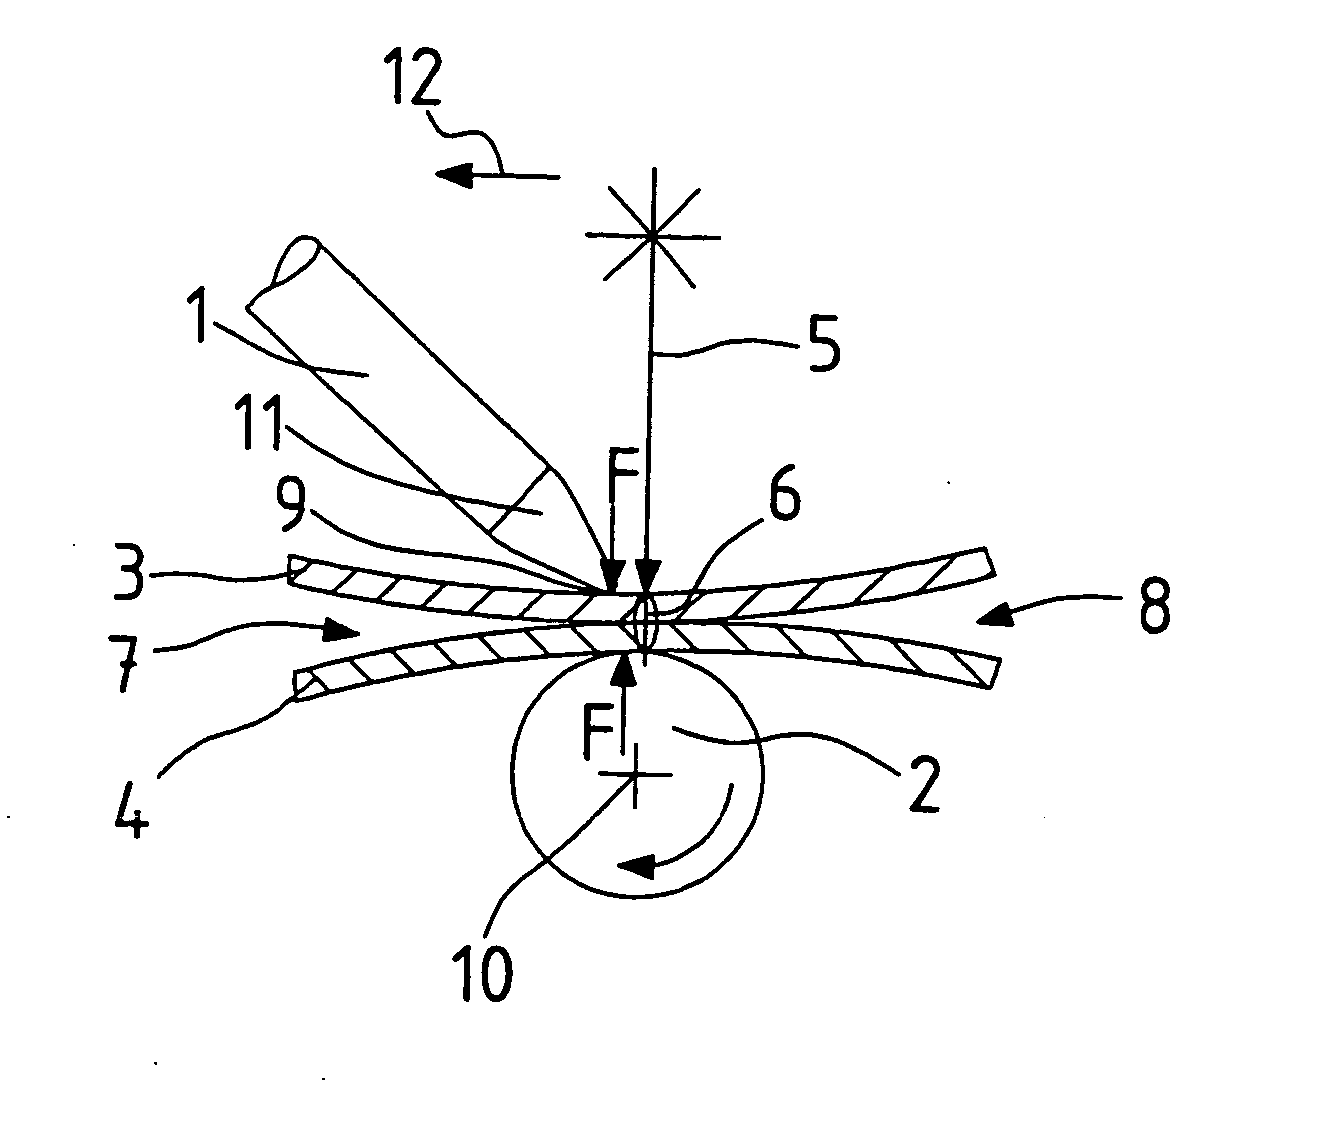 Clamping device for processing work pieces